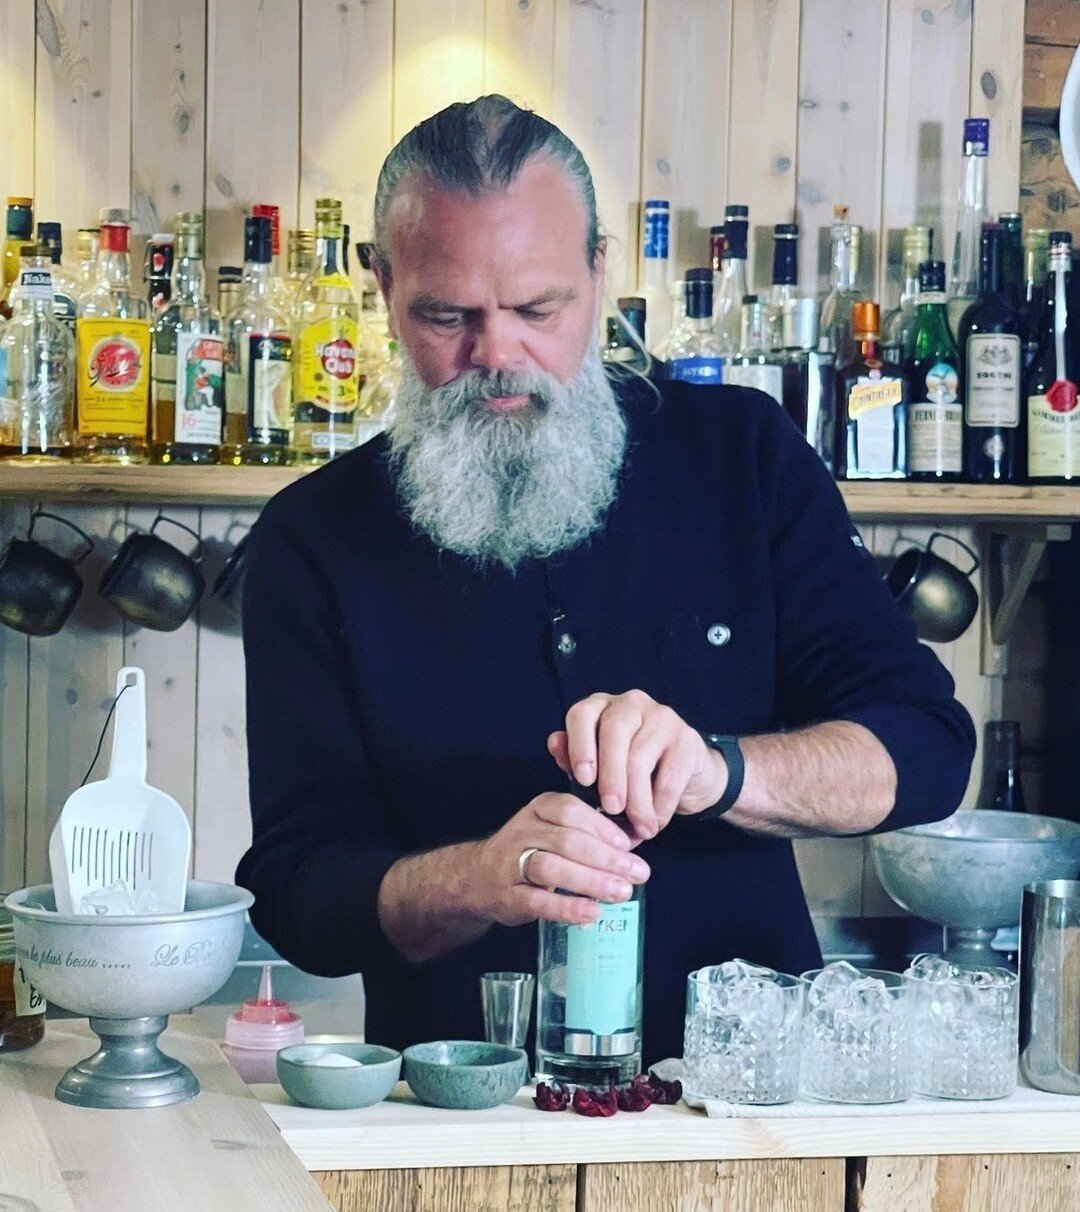 Have a Friday drink with us! Now you can make @bareksten signature drink from this weeks episode - Rosenrot 🍸️🌄⁠
⁠
* 6 cl gin⁠
* 1 ts rosenrot tinktvre⁠
Stirred with ice, poured over to Cocktail glass�Garniched with lemon twist⁠
⁠
For more recipes,